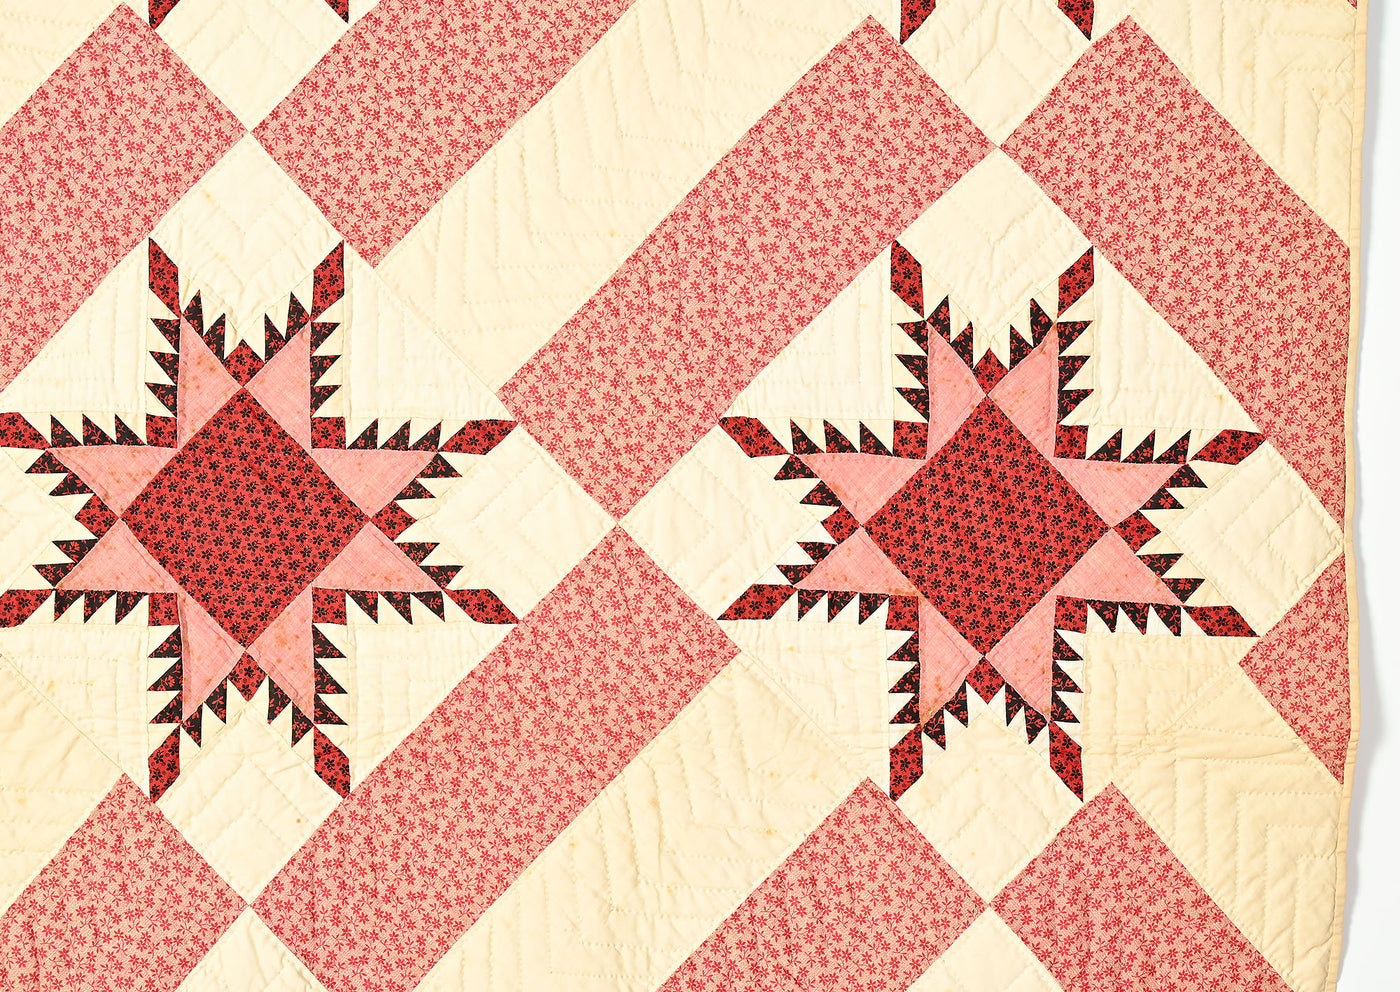 Feathered Stars Quilt: Circa 1875-85